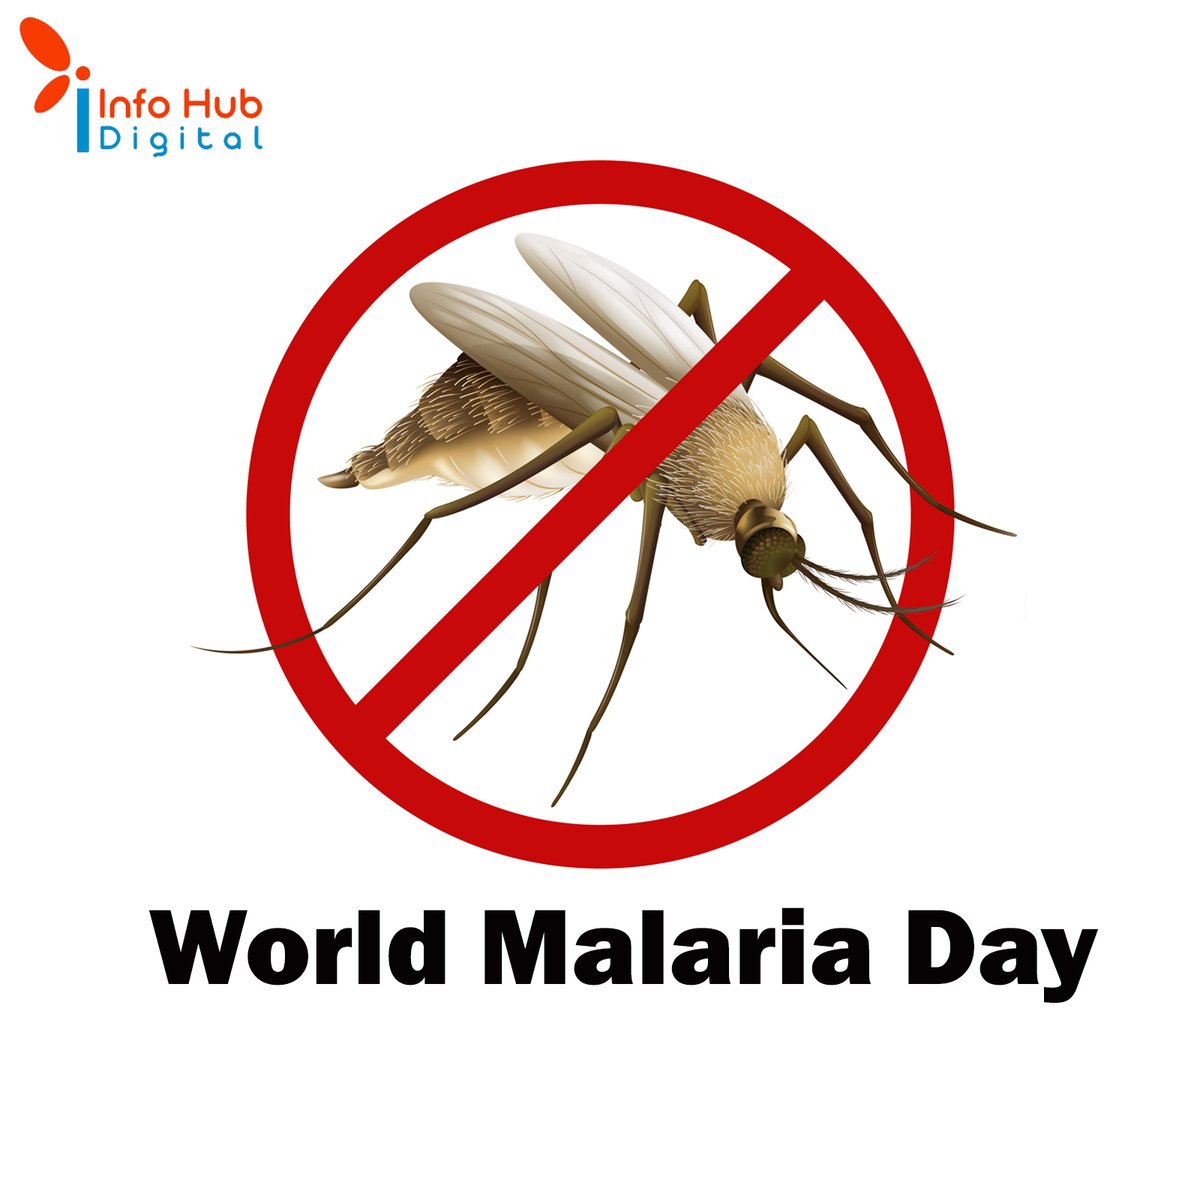 'Today is #WorldMalariaDay! 🌍 Let's unite to combat this deadly disease and save lives.
Prevention, early diagnosis, and treatment are key. Together, we can make a difference! 

#MalariaAwareness #HealthForAll  #FightMalaria #MalariaFreeWorld #WorldHealth #MalariaDay #StaySafe'